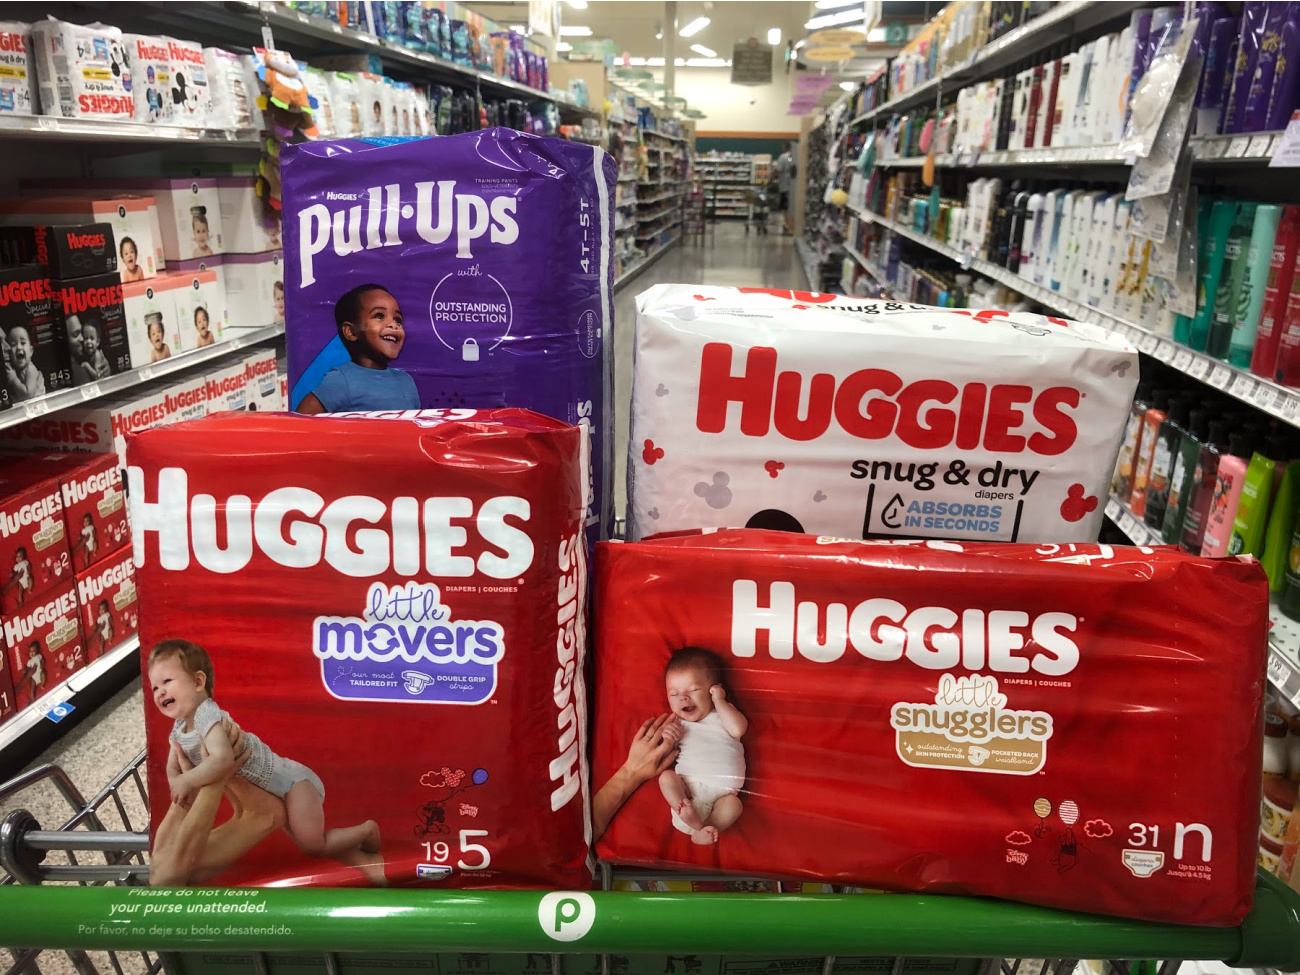 Grab Big Savings On Huggies Diapers And Pull-Ups This Week At Publix on I Heart Publix 1